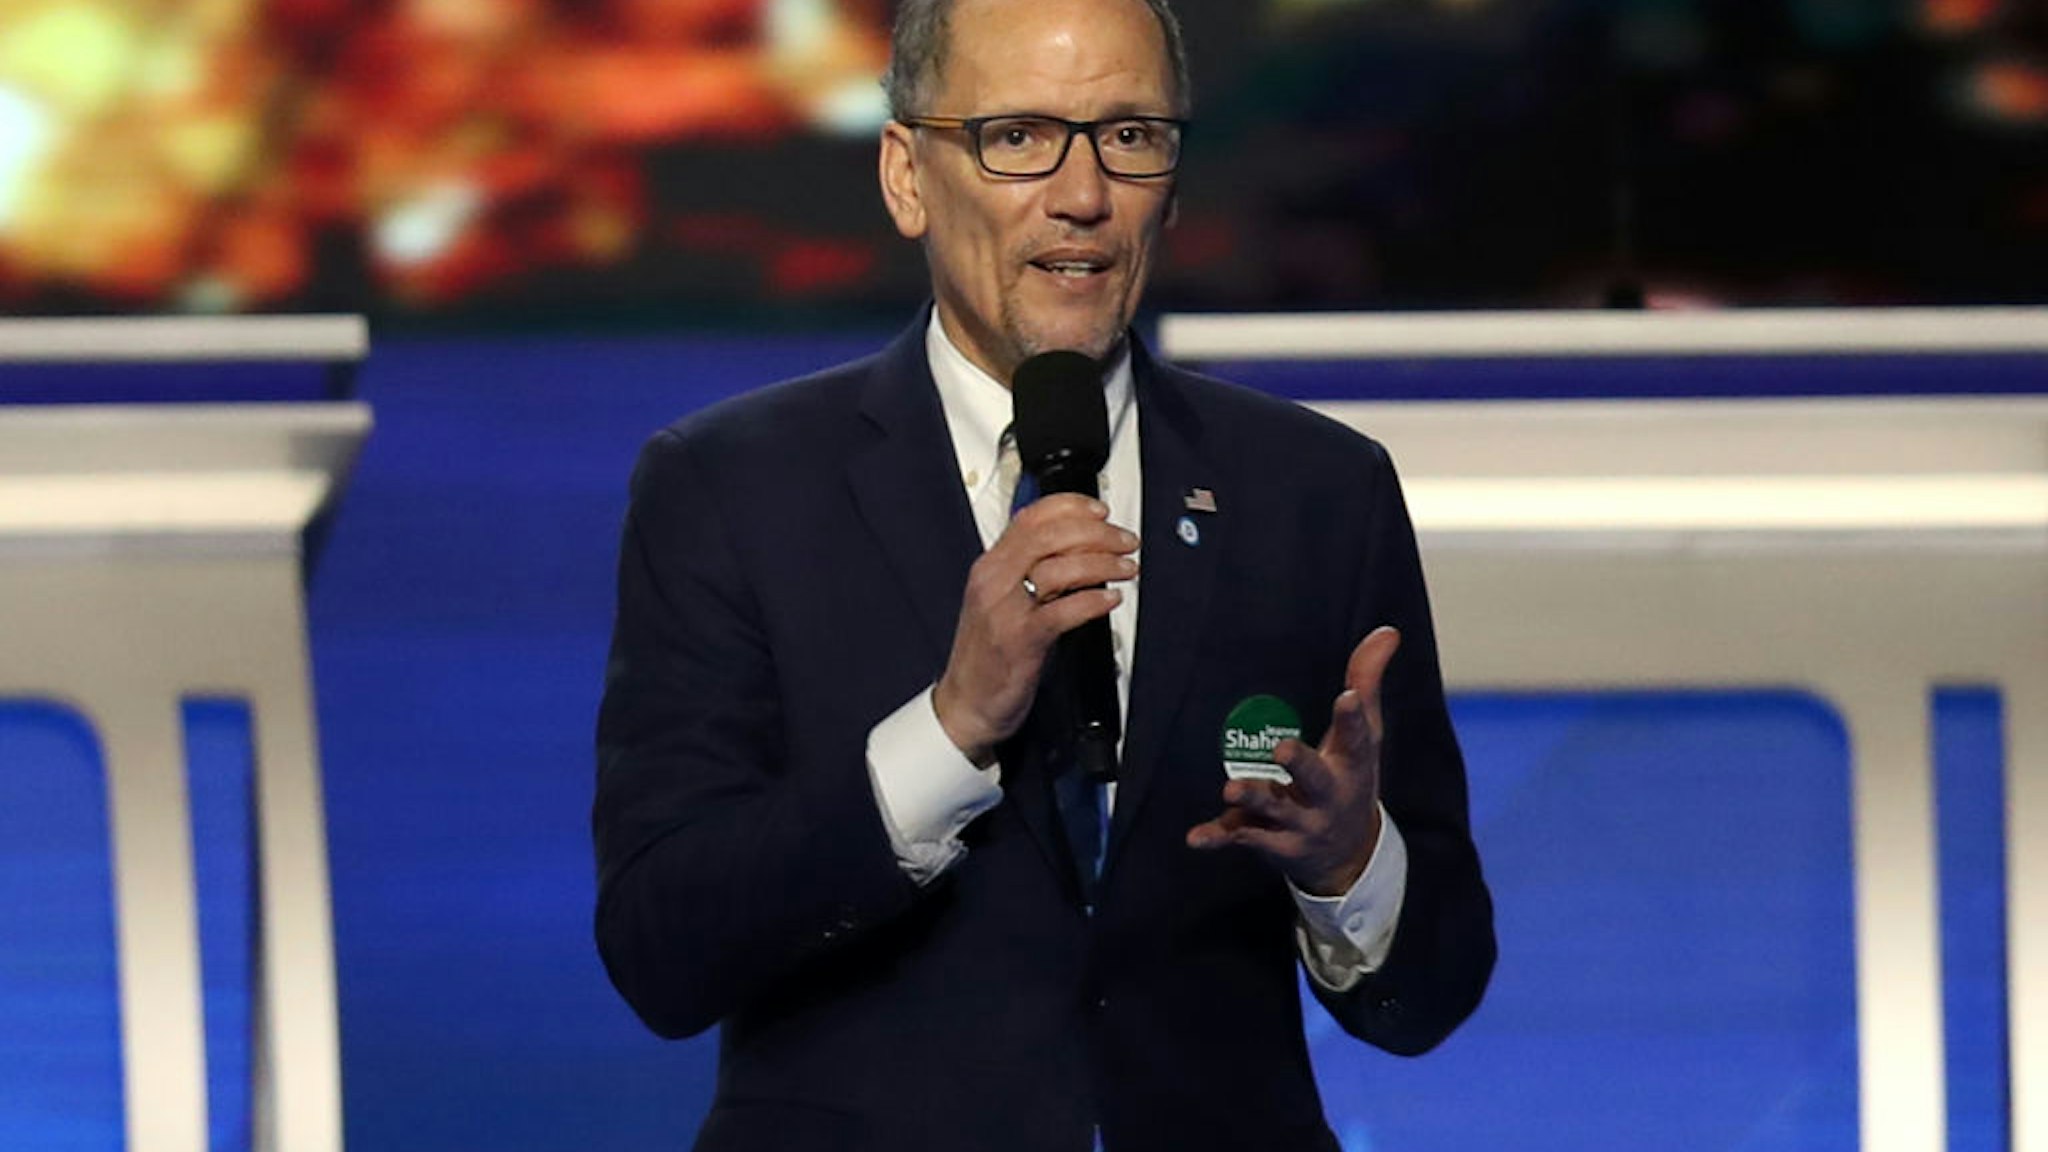 ANCHESTER, NEW HAMPSHIRE - FEBRUARY 07: Chair of the Democratic National Committee Tom Perez speaks prior to the Democratic presidential primary debate in the Sullivan Arena at St. Anselm College on February 07, 2020 in Manchester, New Hampshire. Seven candidates qualified for the second Democratic presidential primary debate of 2020 which comes just days before the New Hampshire primary on February 11. (Photo by Joe Raedle/Getty Images)